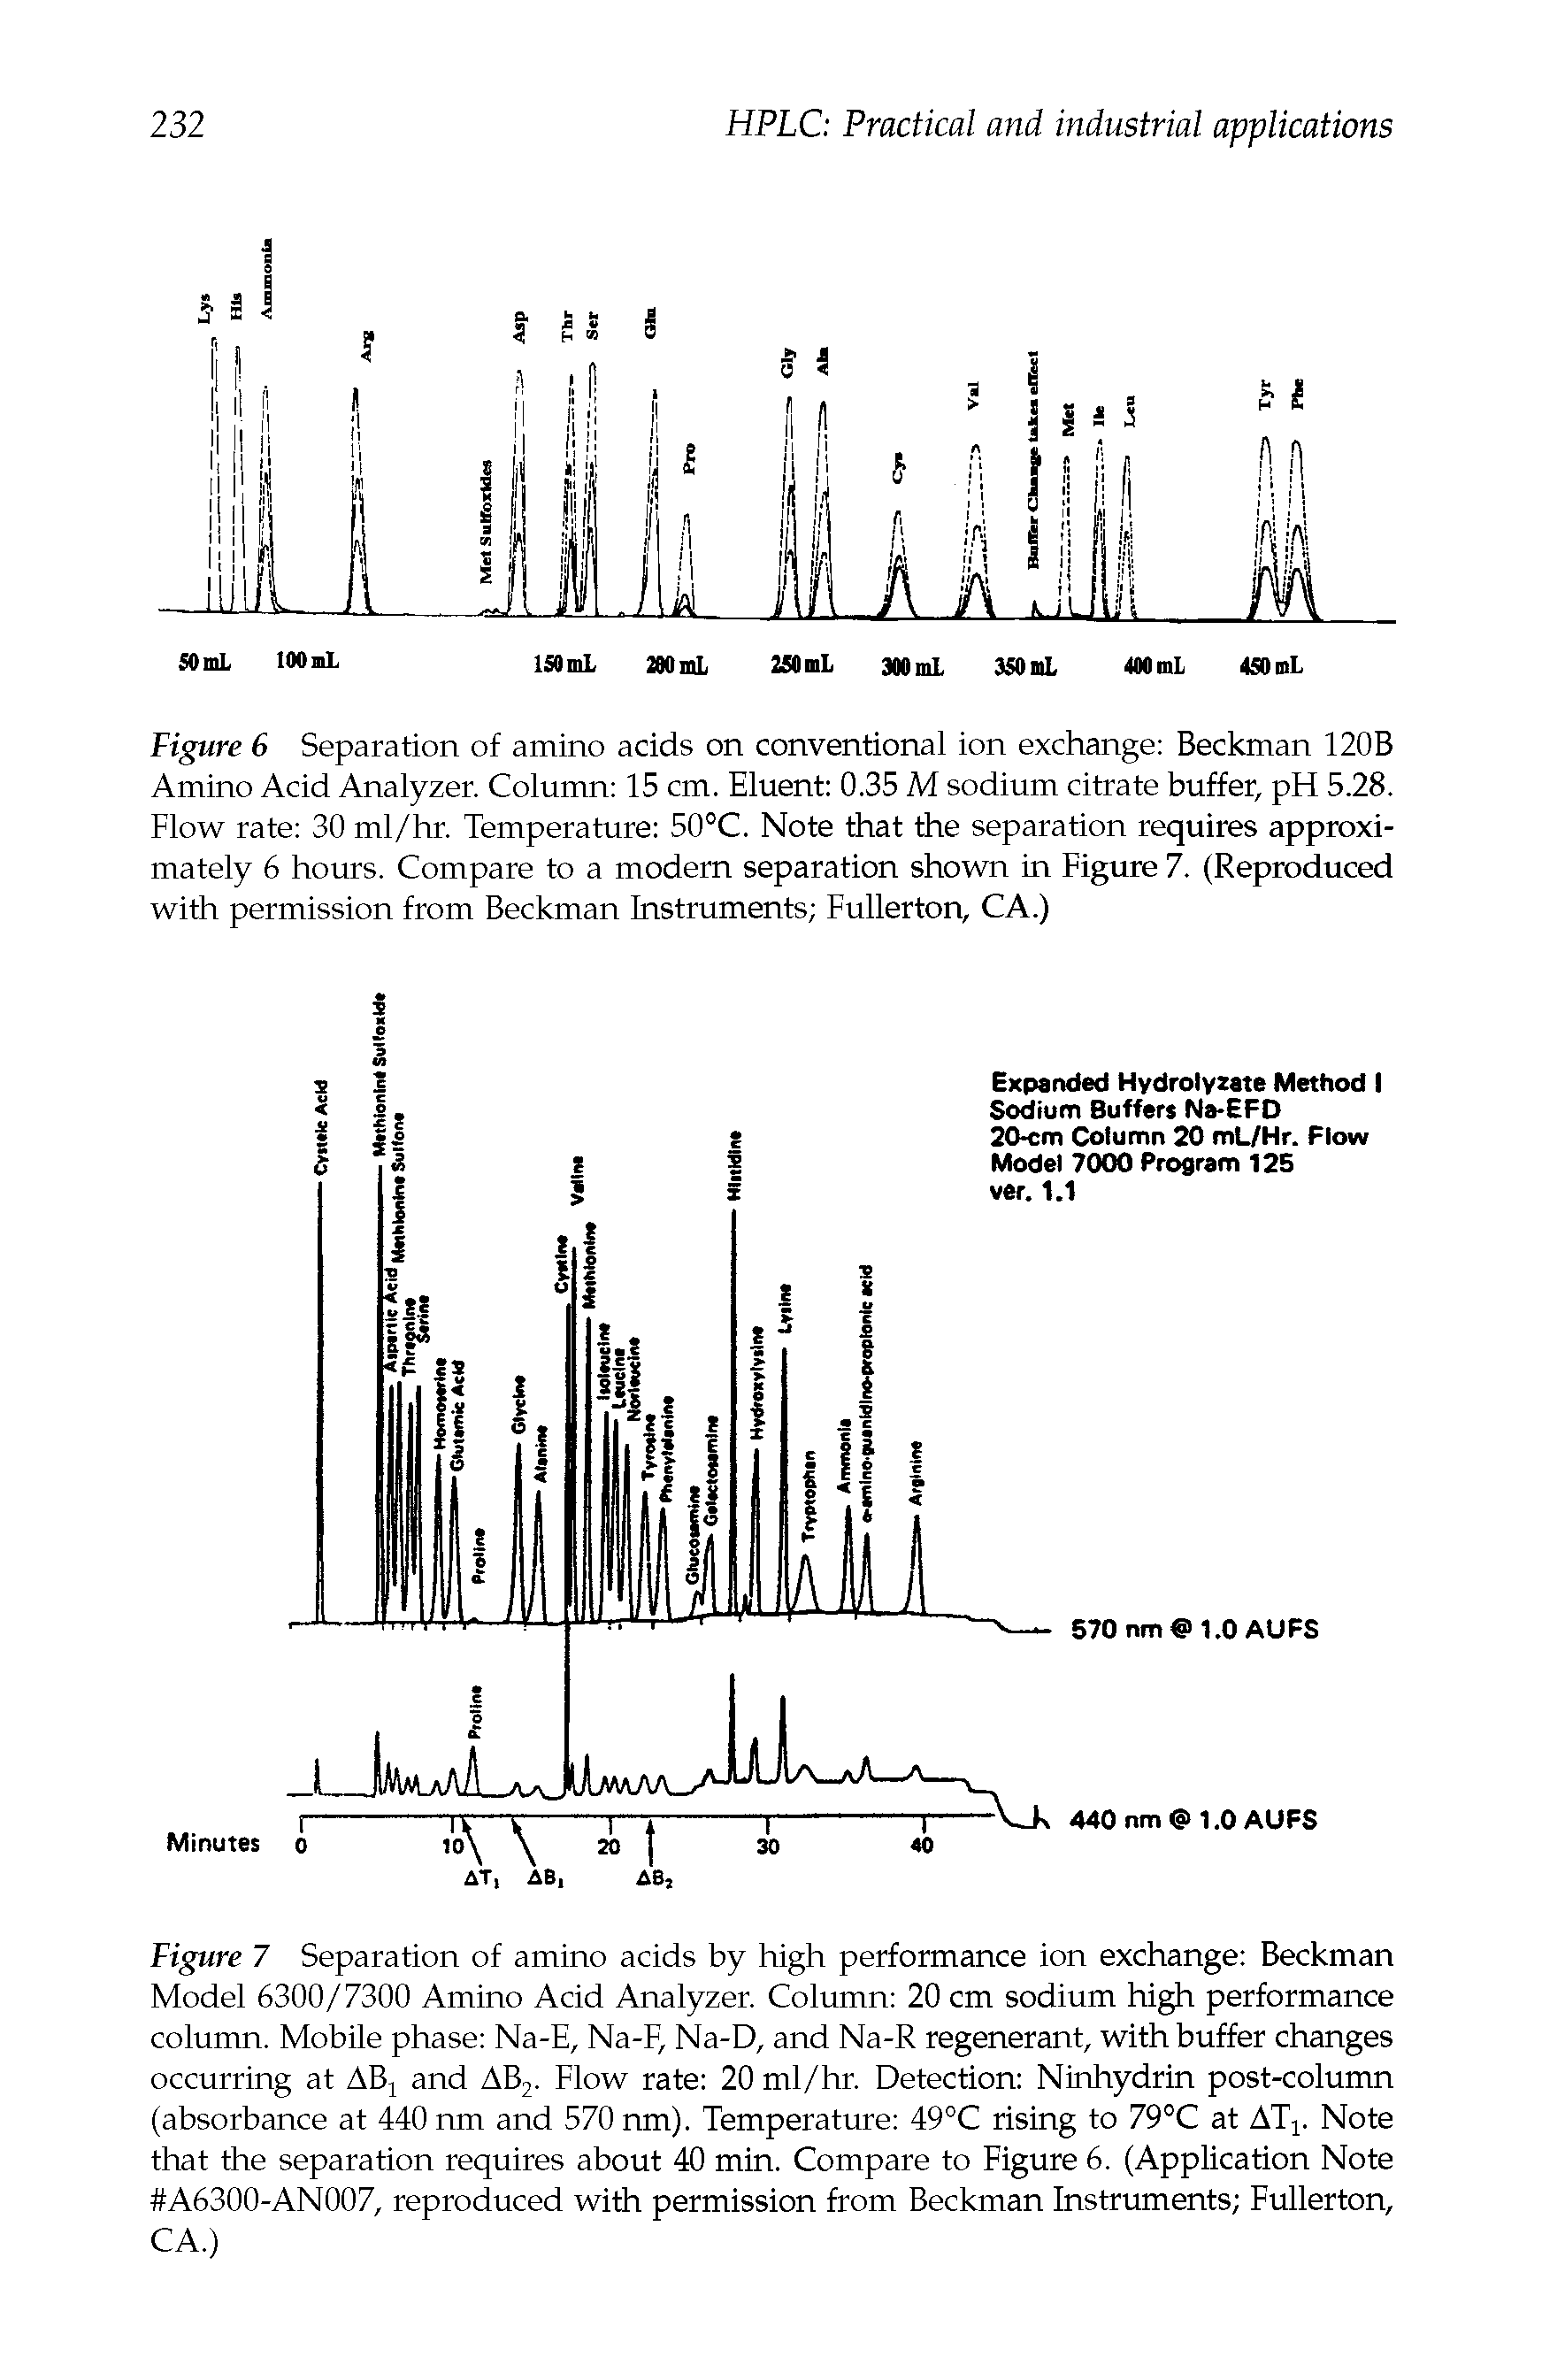 Figure 6 Separation of amino acids on conventional ion exchange Beckman 120B Amino Acid Analyzer. Column 15 cm. Eluent 0.35 M sodium citrate buffer, pH 5.28. Flow rate 30 ml/hr. Temperature 50°C. Note that the separation requires approximately 6 hours. Compare to a modern separation shown in Figure 7. (Reproduced with permission from Beckman Instruments Fullerton, CA.)...